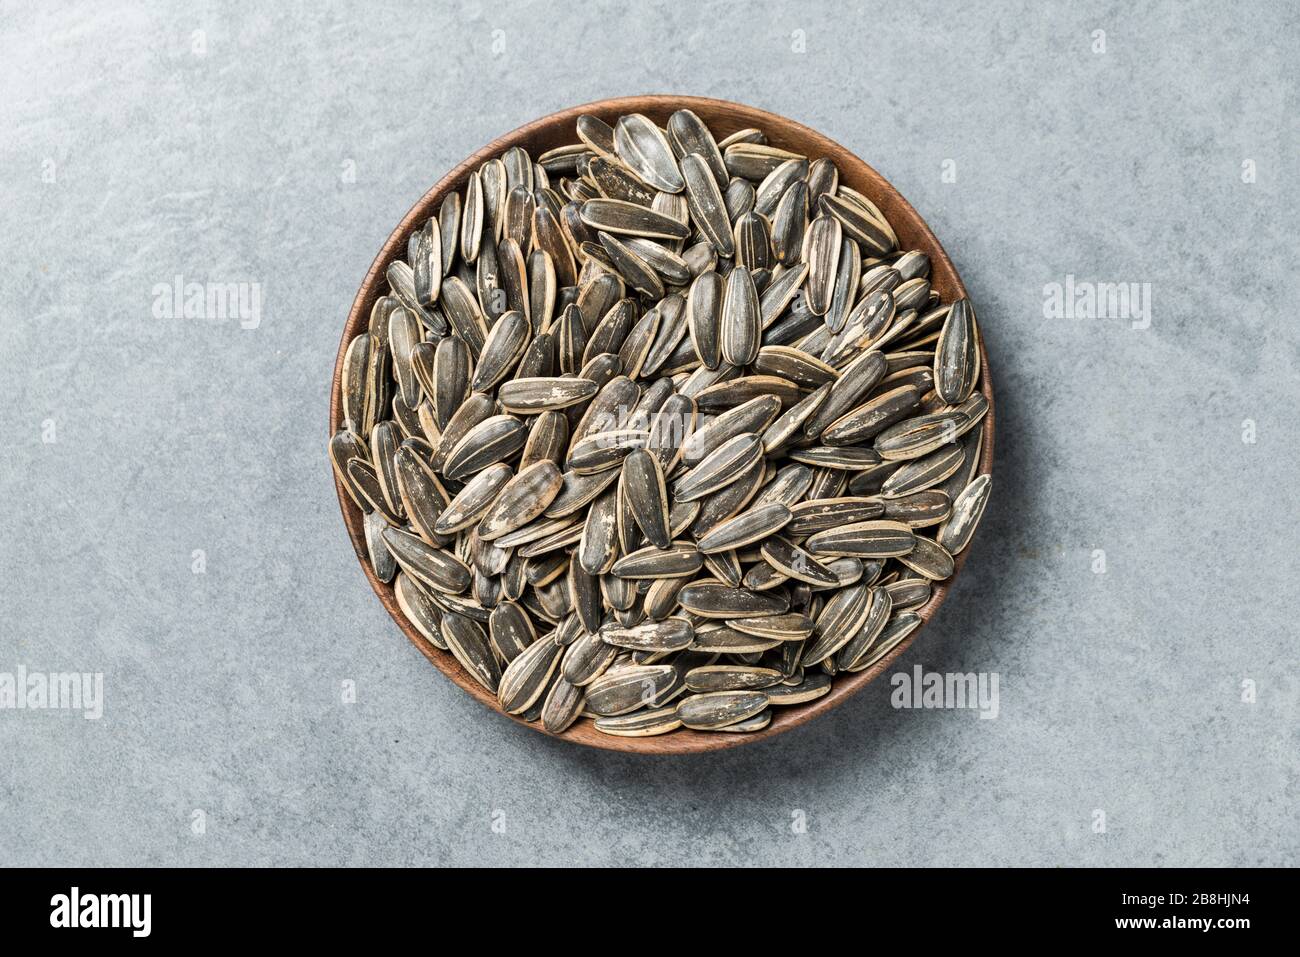 Sunflower Seeds And Tea Chinese Culture 2B8HJN4 